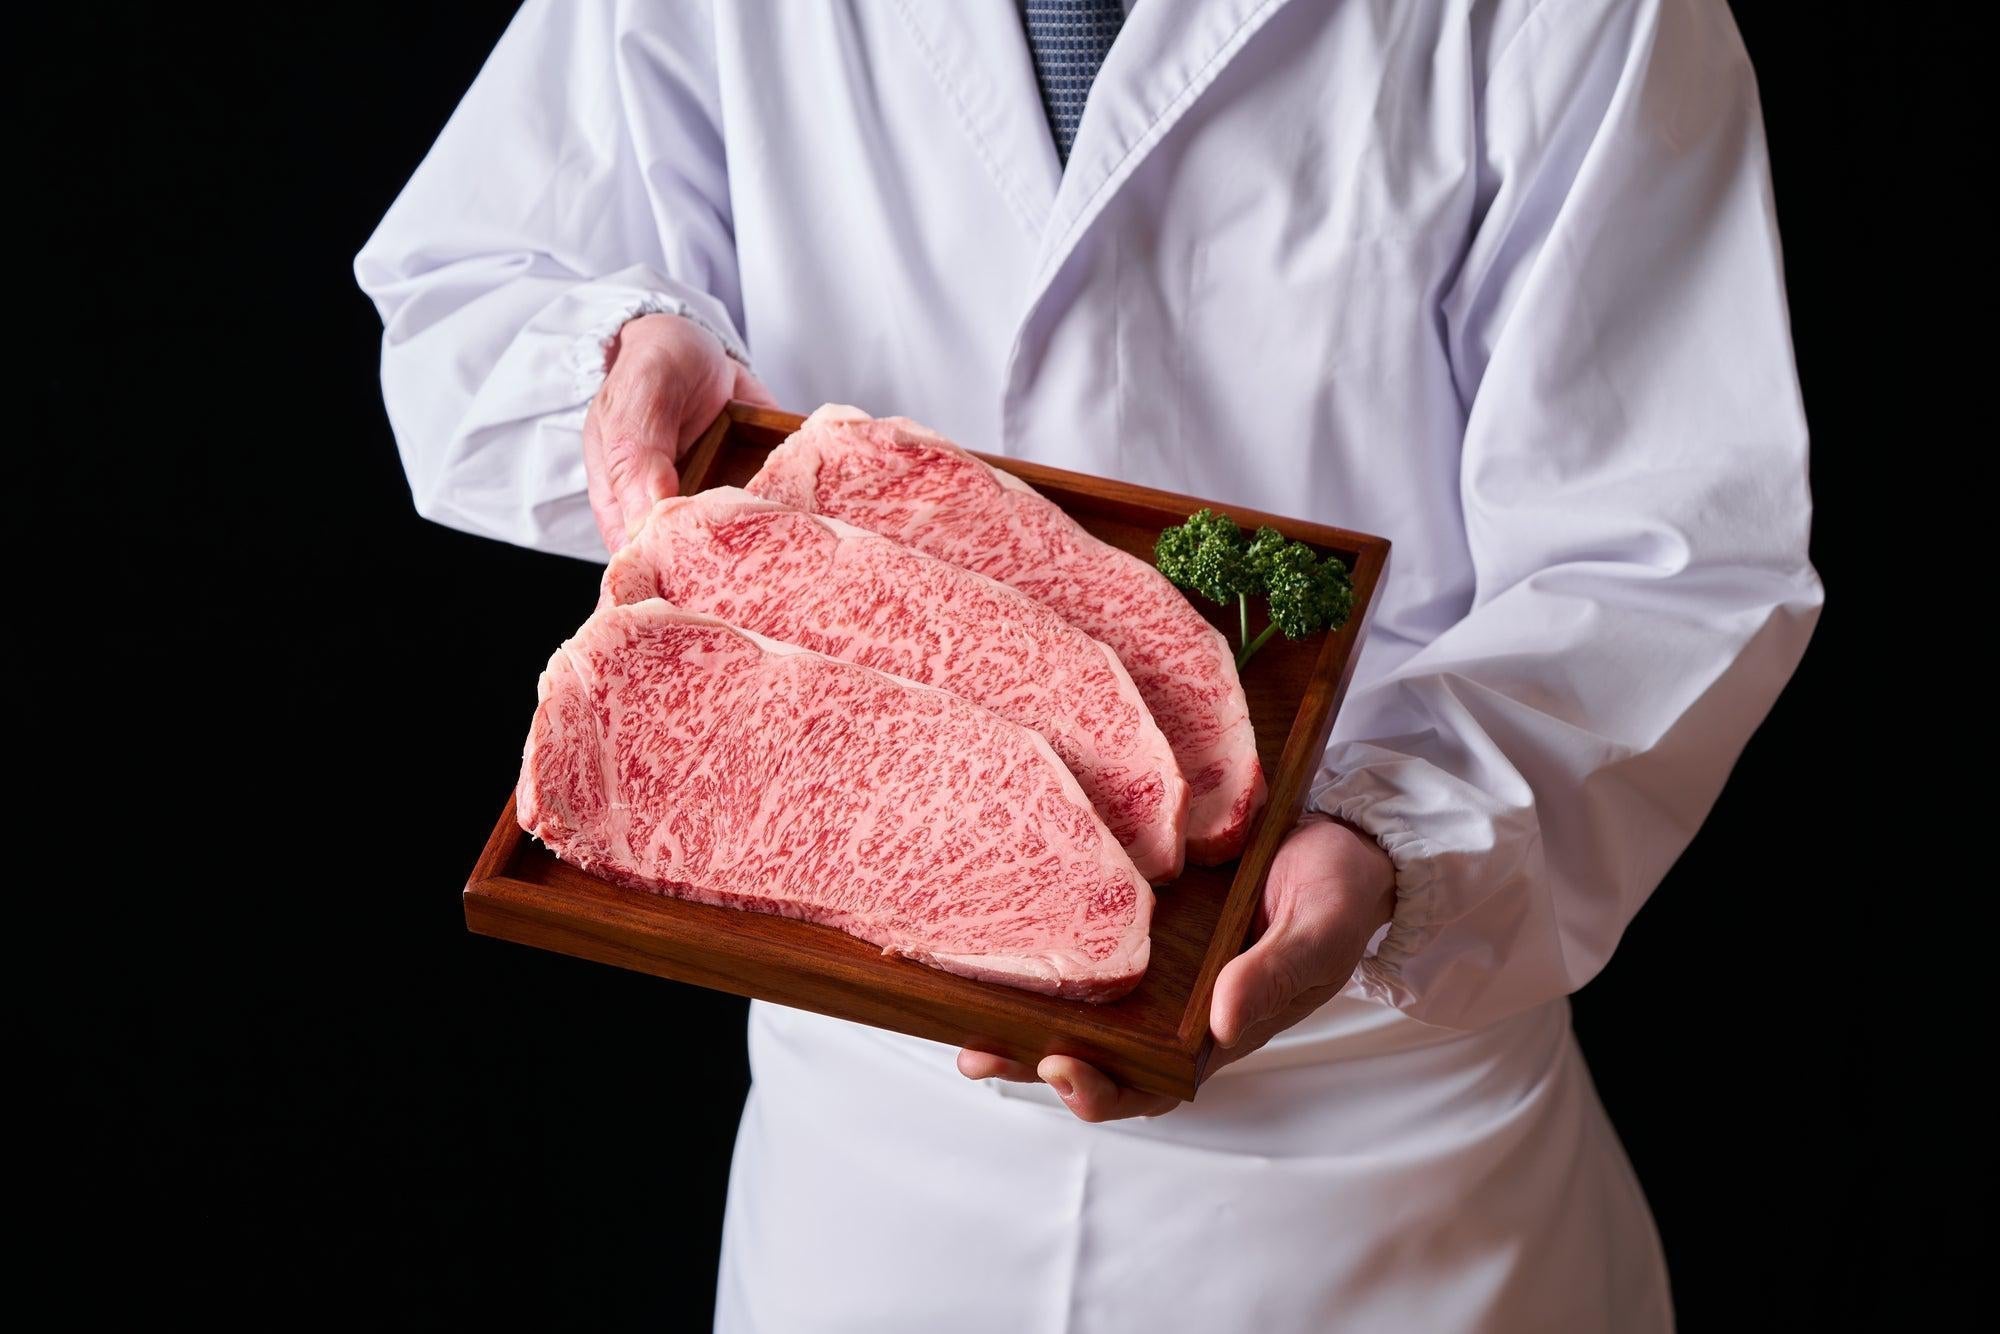 All you need to know about Japanese Wagyu Beef